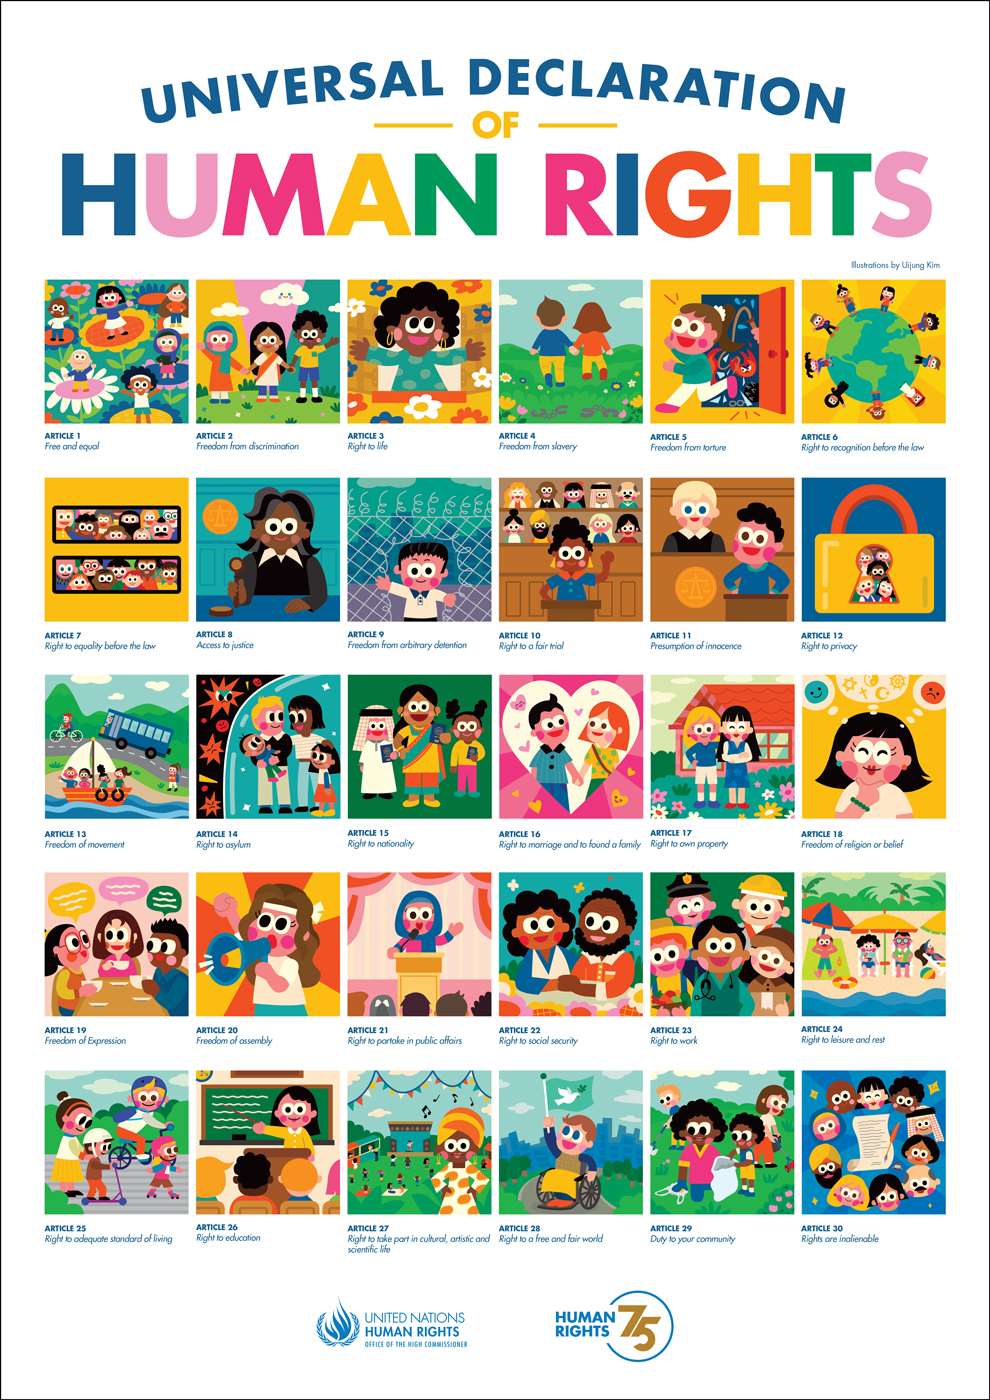 Uijung Kim, Open Day Poister, United Nations, Universal Declaration of Human Rights